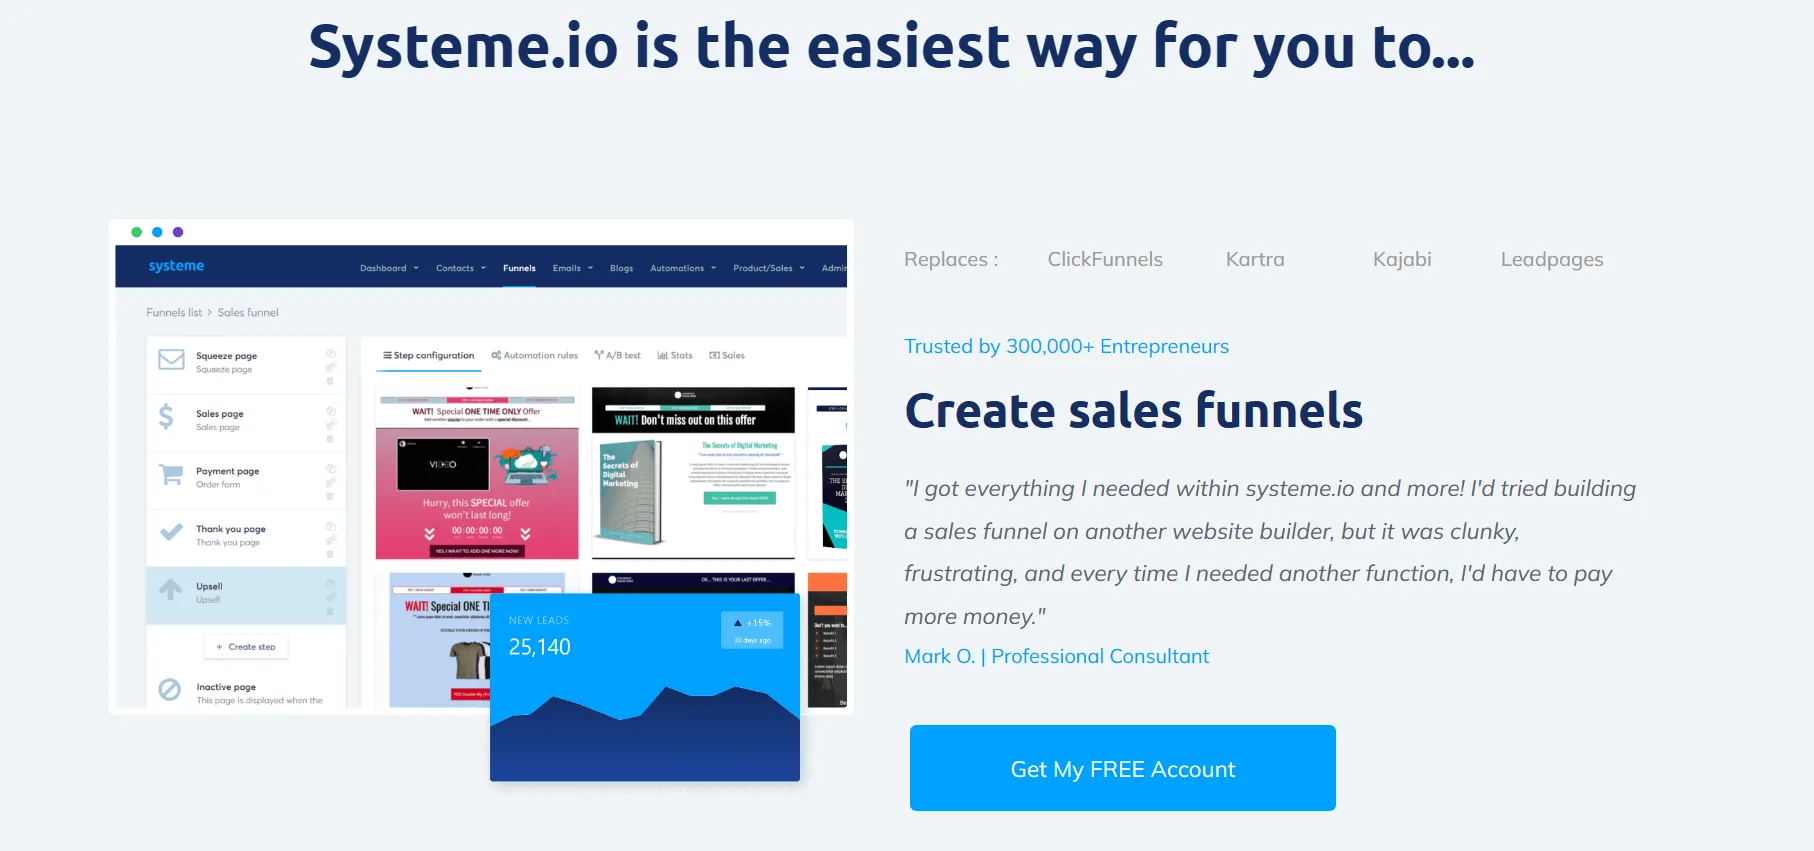 Systeme.io Review- Features